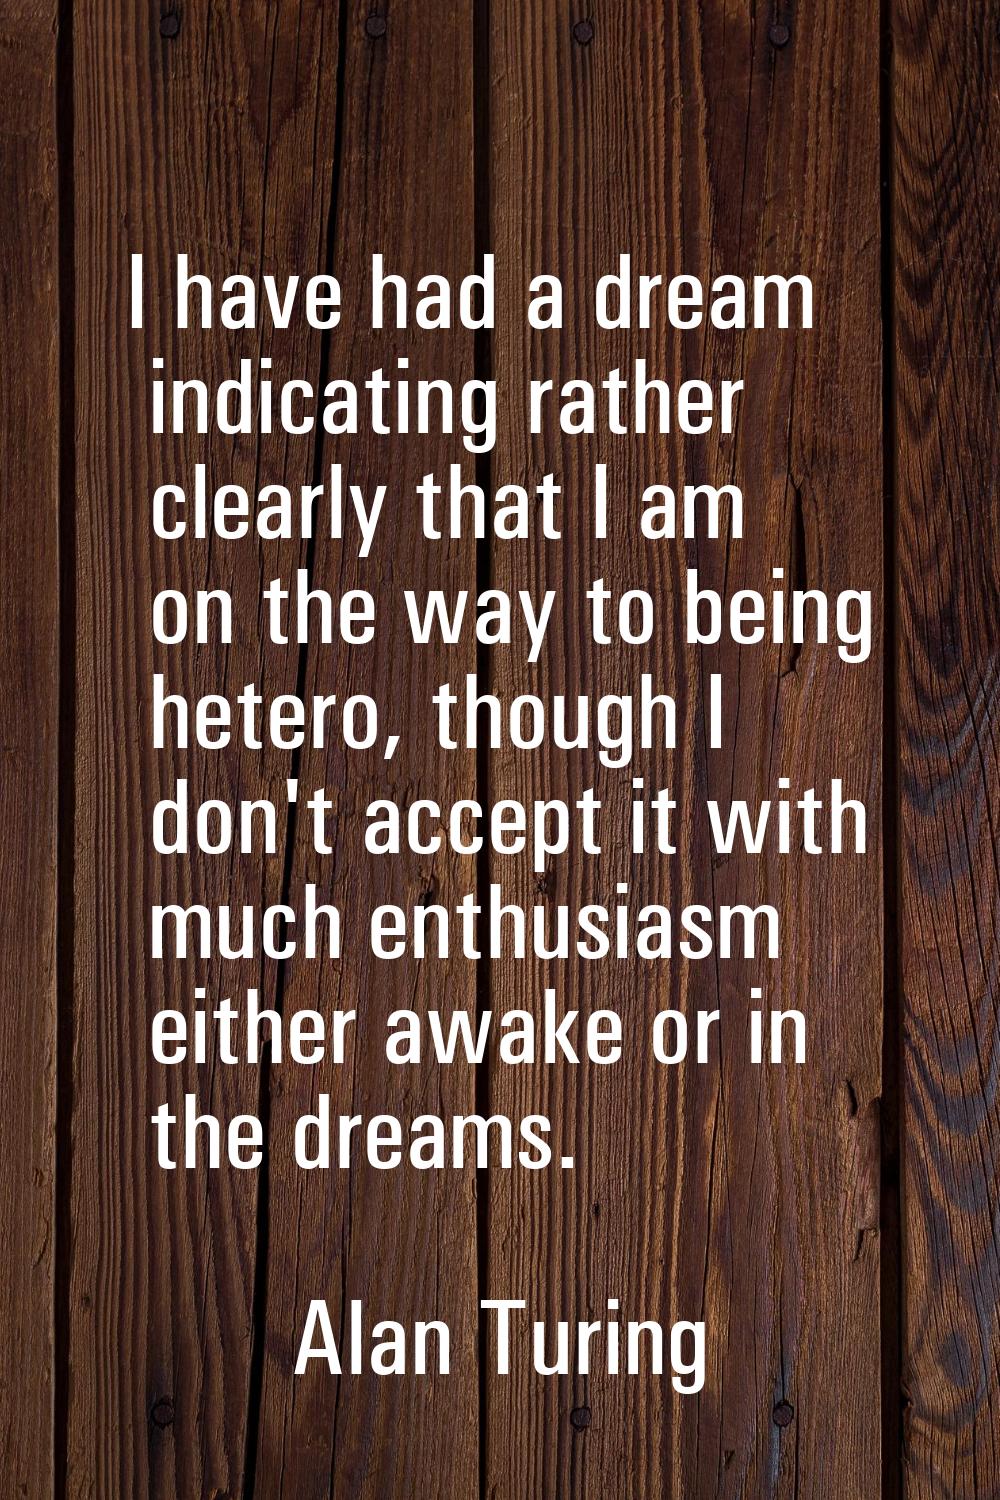 I have had a dream indicating rather clearly that I am on the way to being hetero, though I don't a